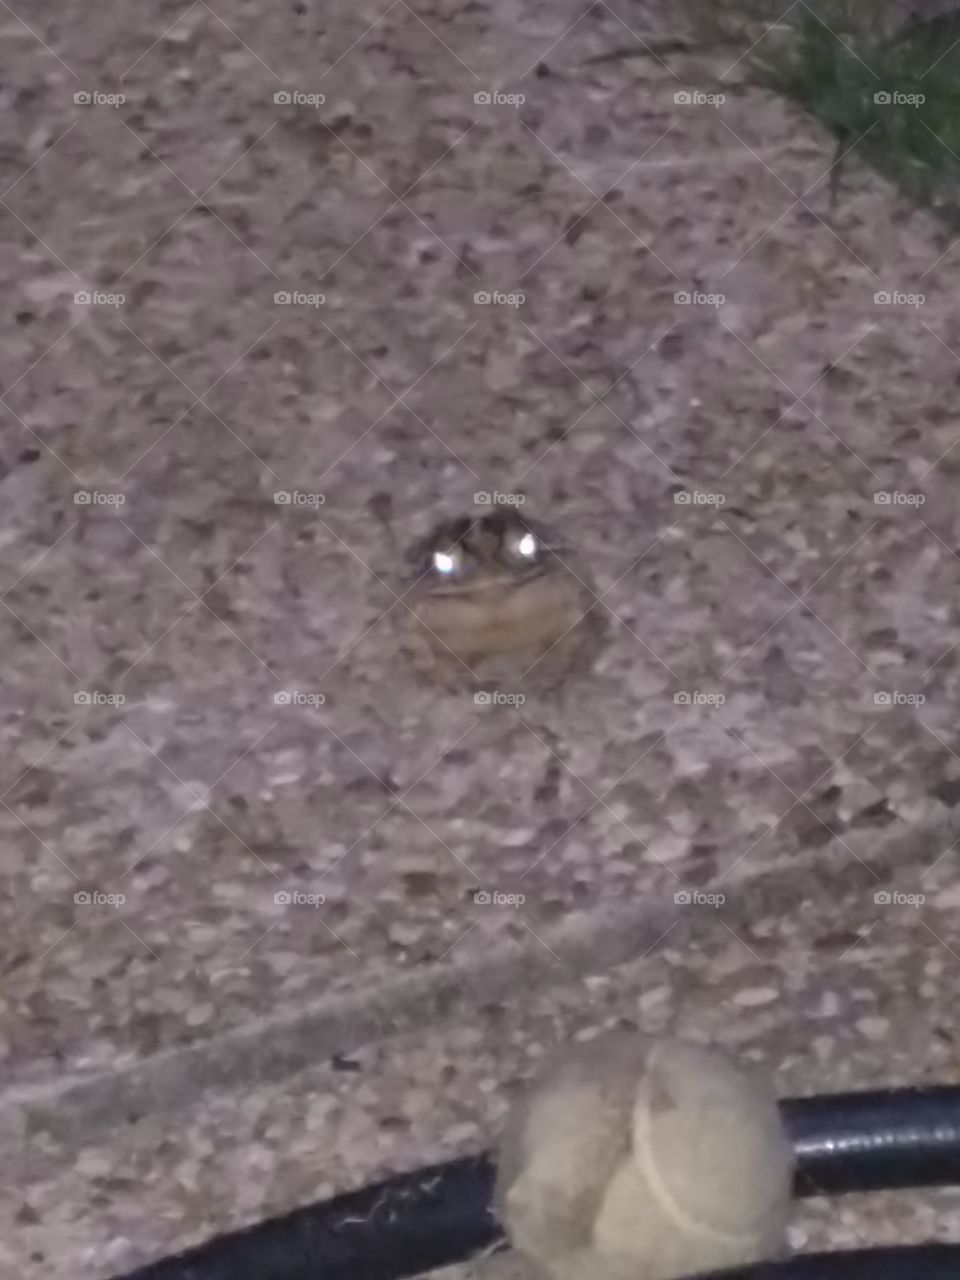 This is Billy. I'm sure he's not the only toad at my home. However, he was always staring at me while I had a cigarette.